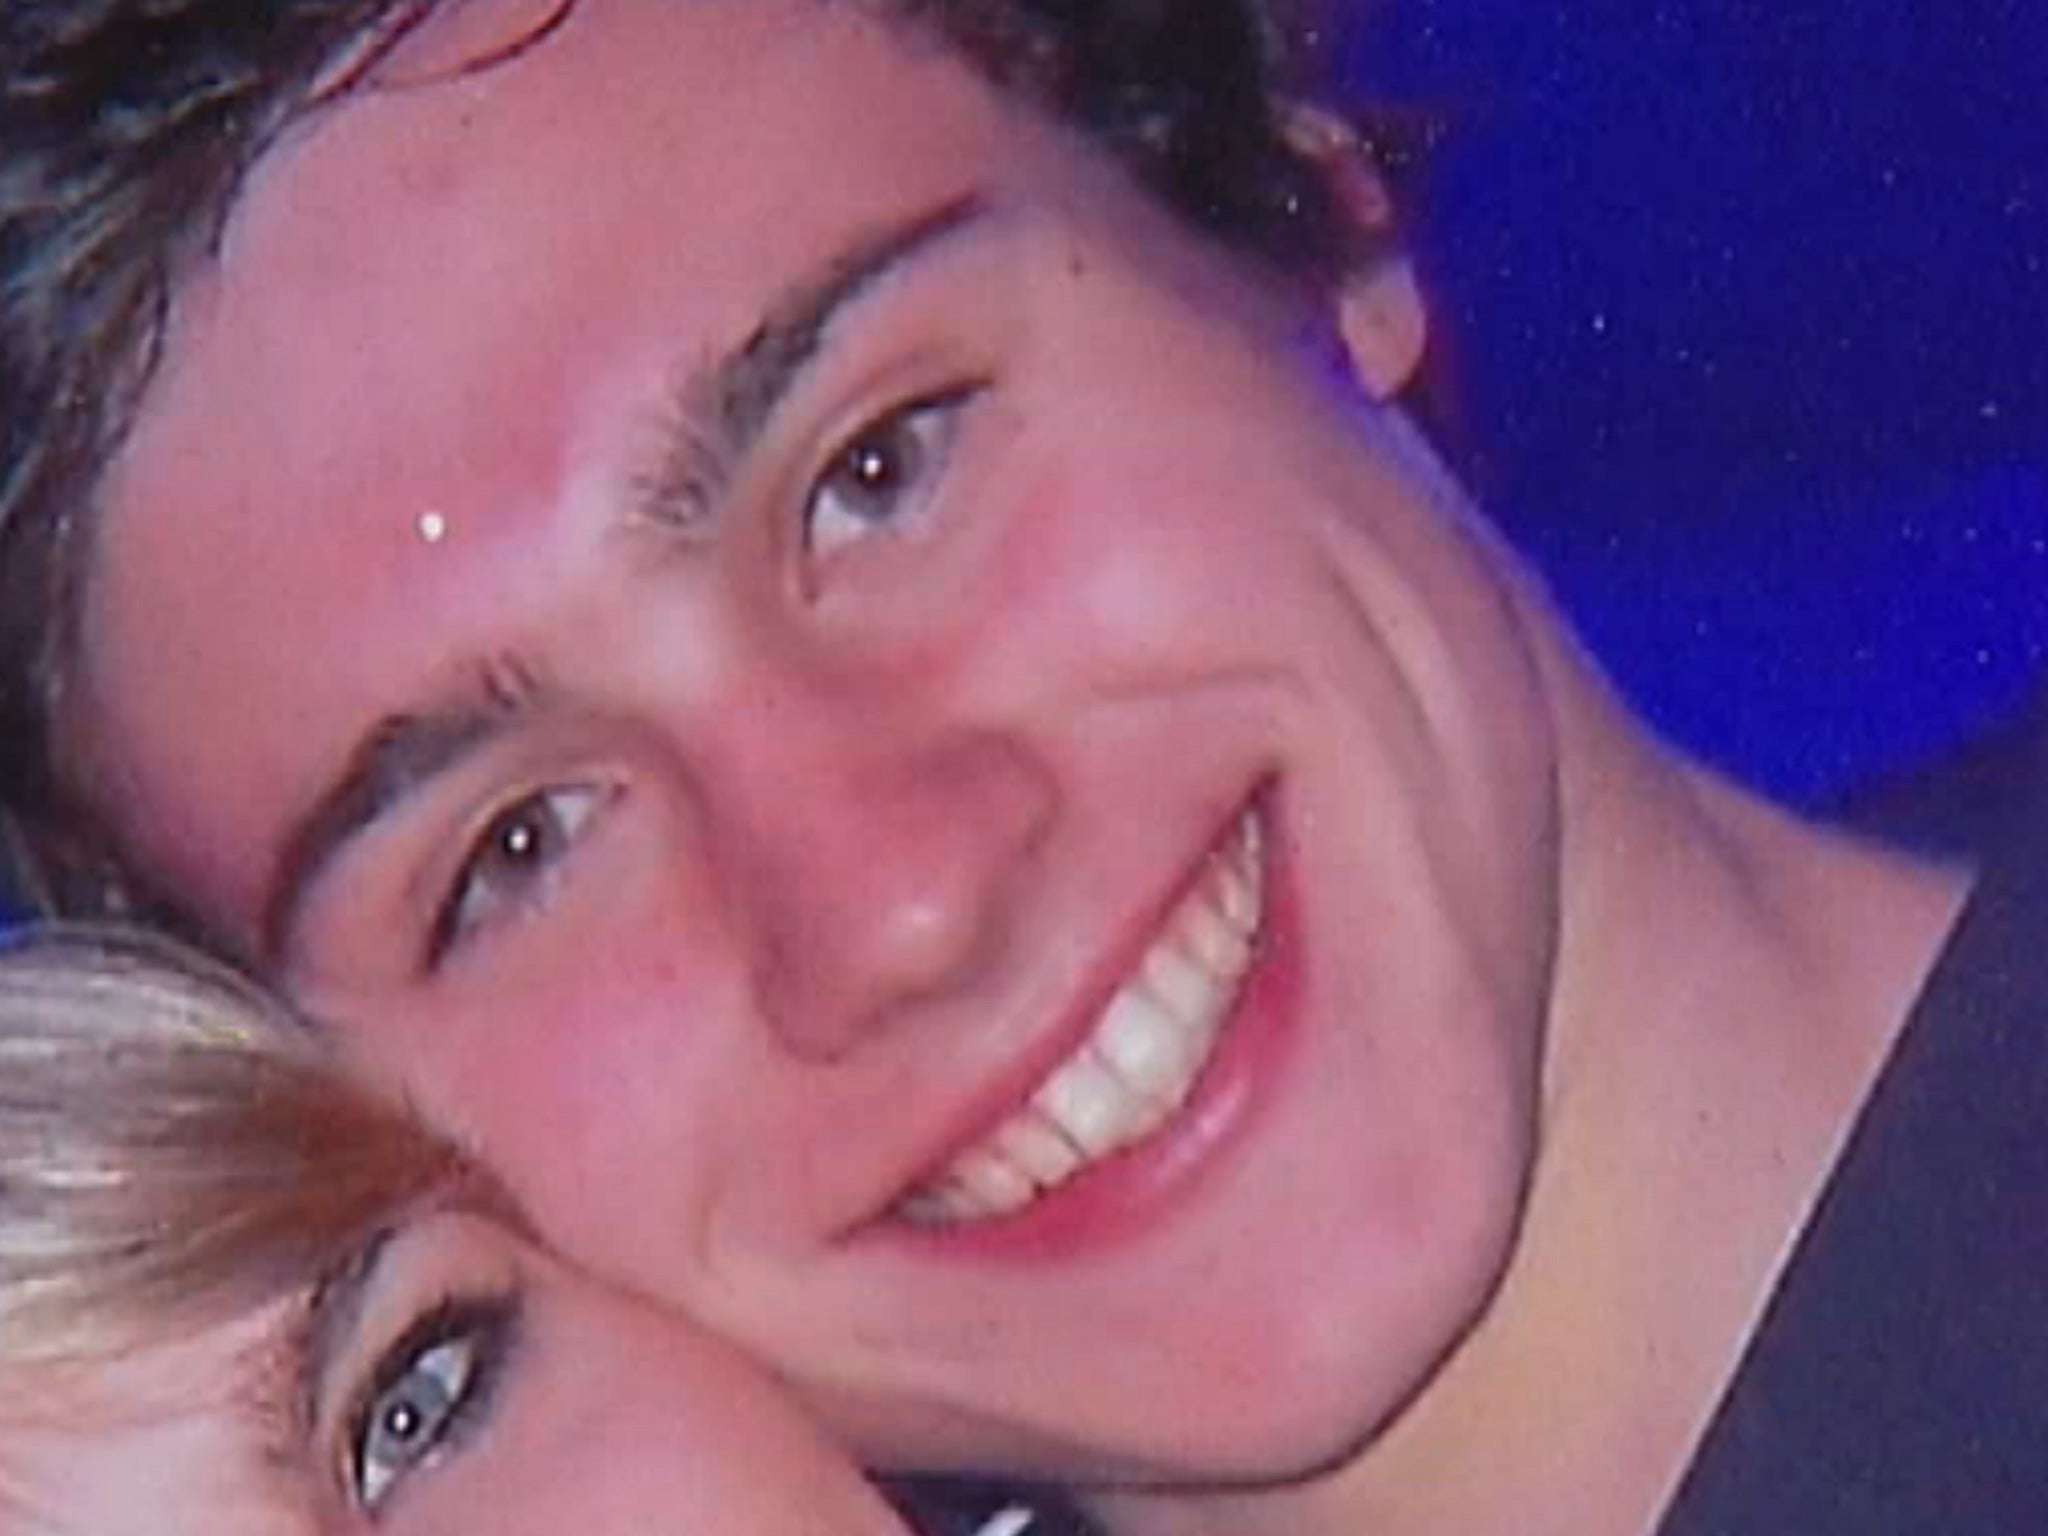 Sam Woodhead, 18, was sunburnt and disoriented, but otherwise unharmed, when a helicopter spotted him